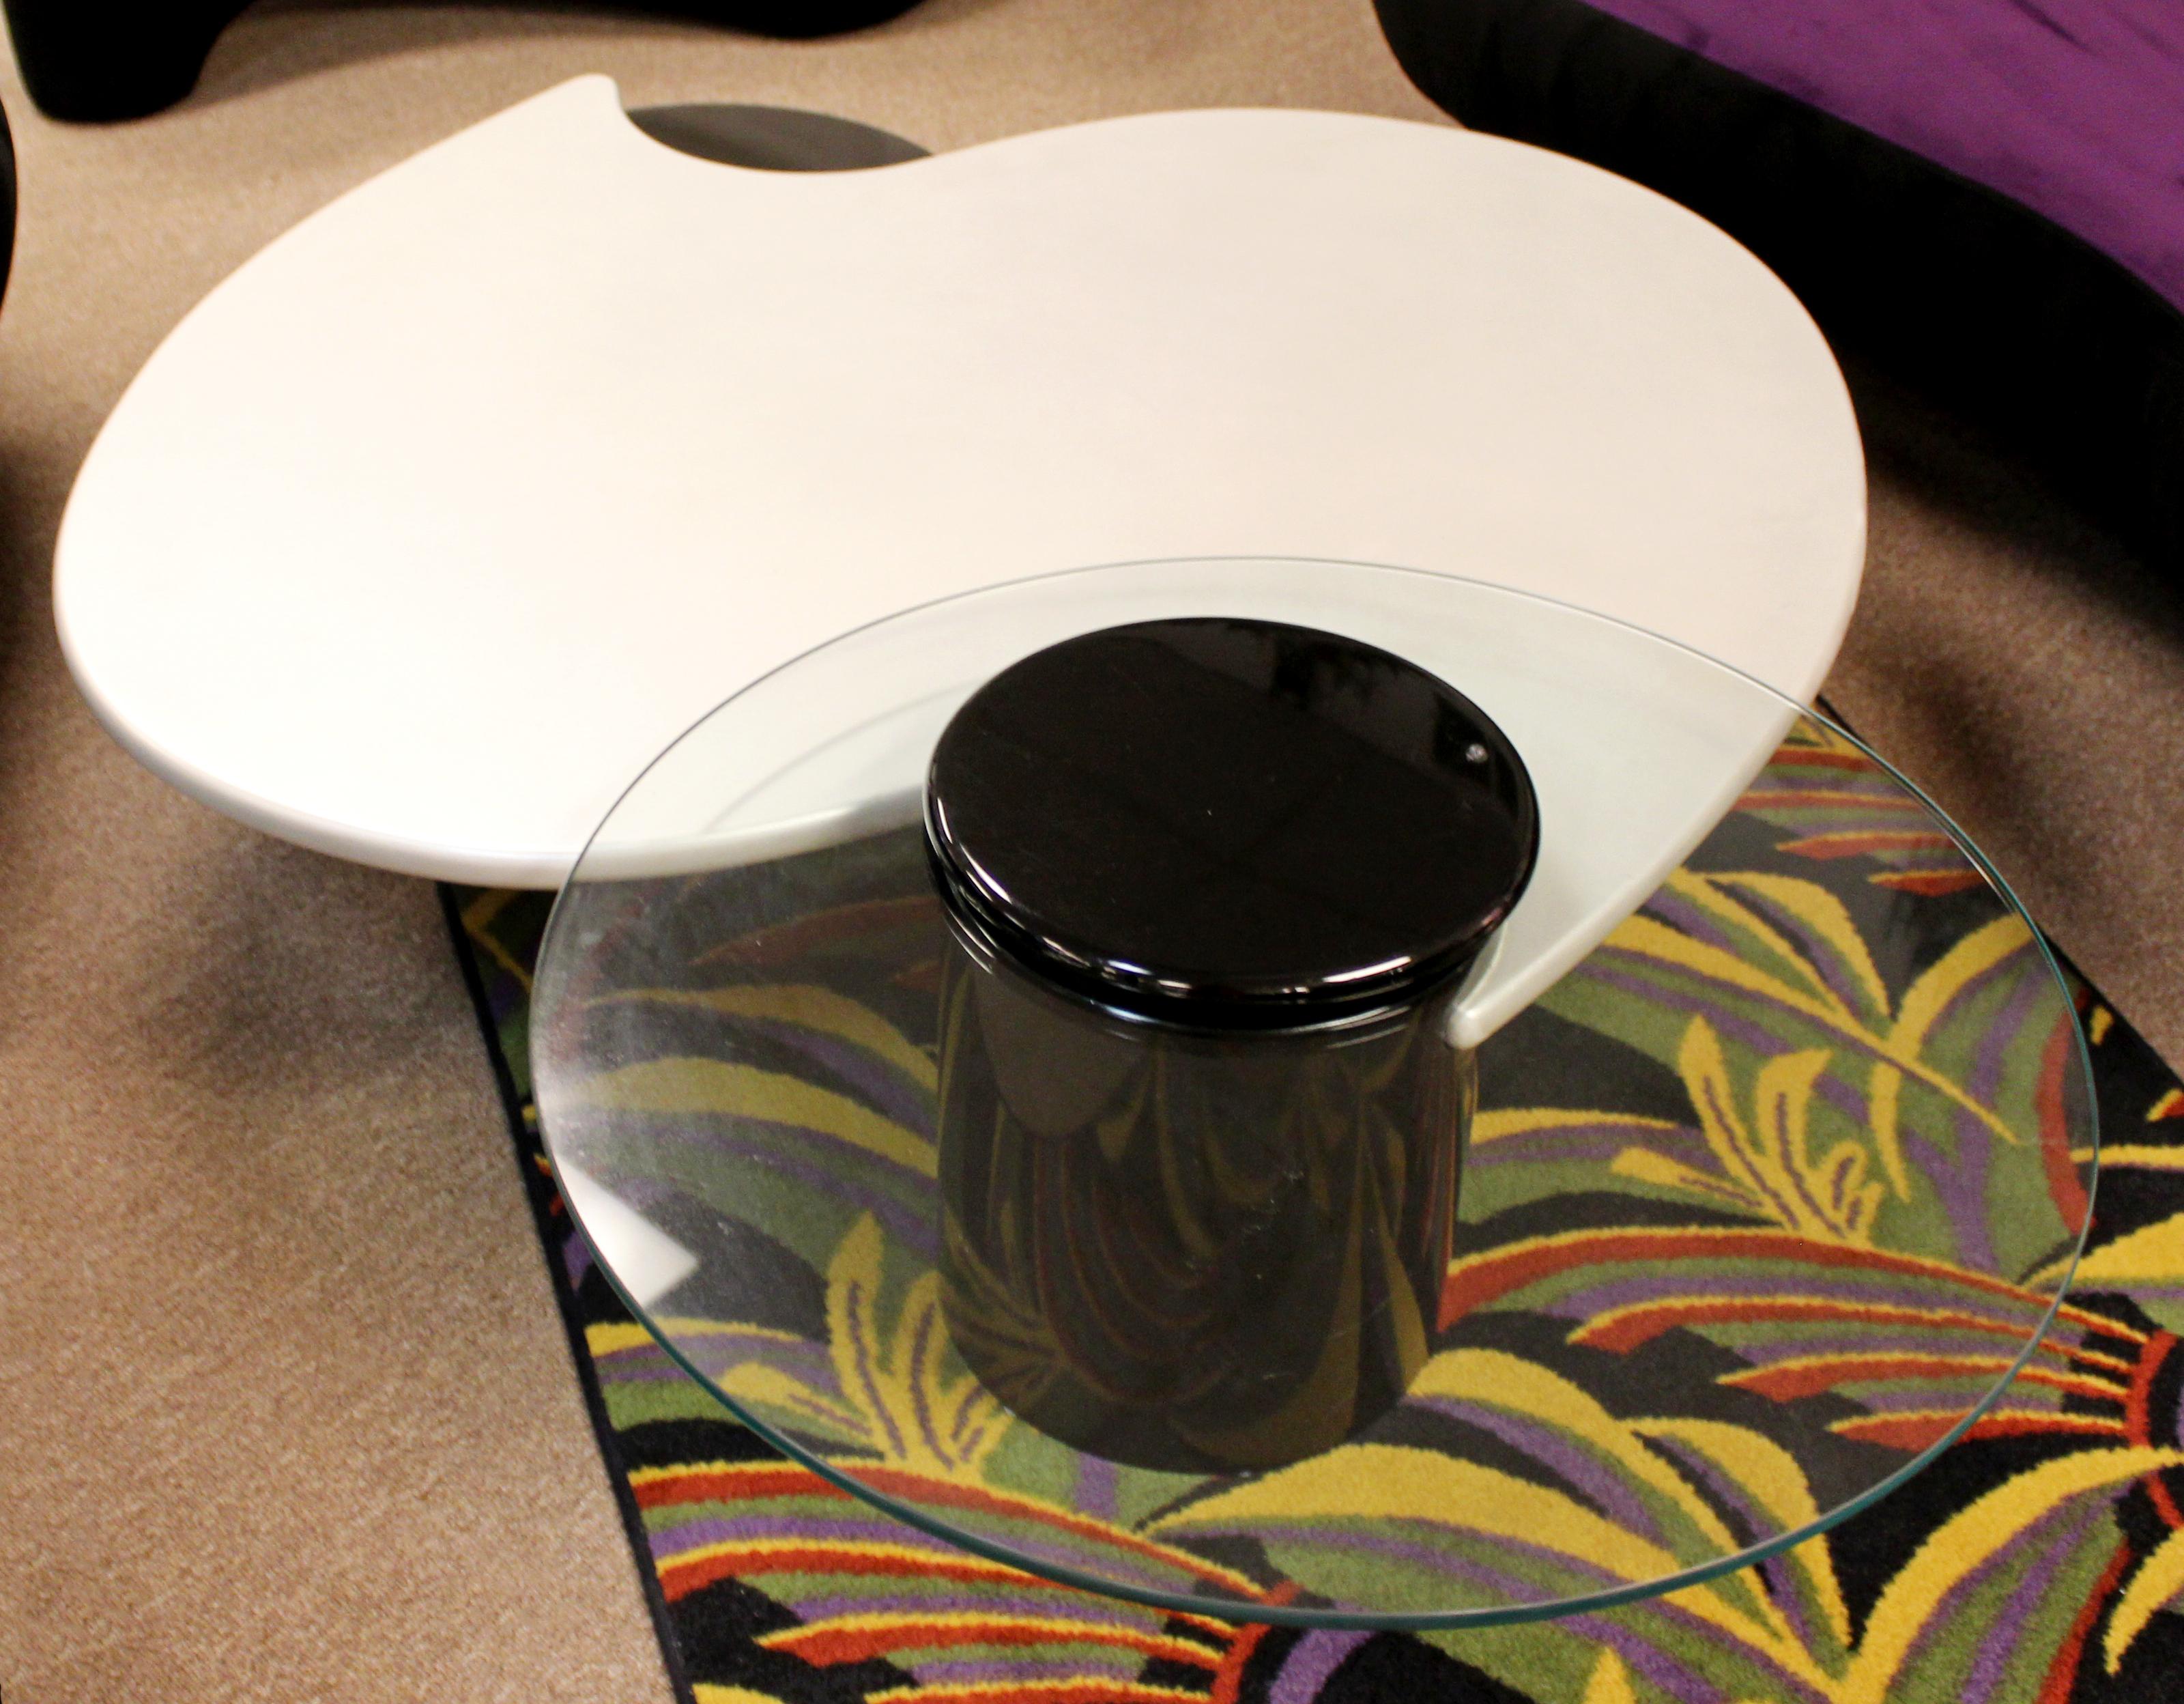 For your consideration is an appealingly luxe looking, asymmetrical, three tier coffee table by Rougier, made in Canada, circa the 1980s. The table is black gloss and repainted pearlize white lacquer with an articulating piece of glass, Lazy Susan